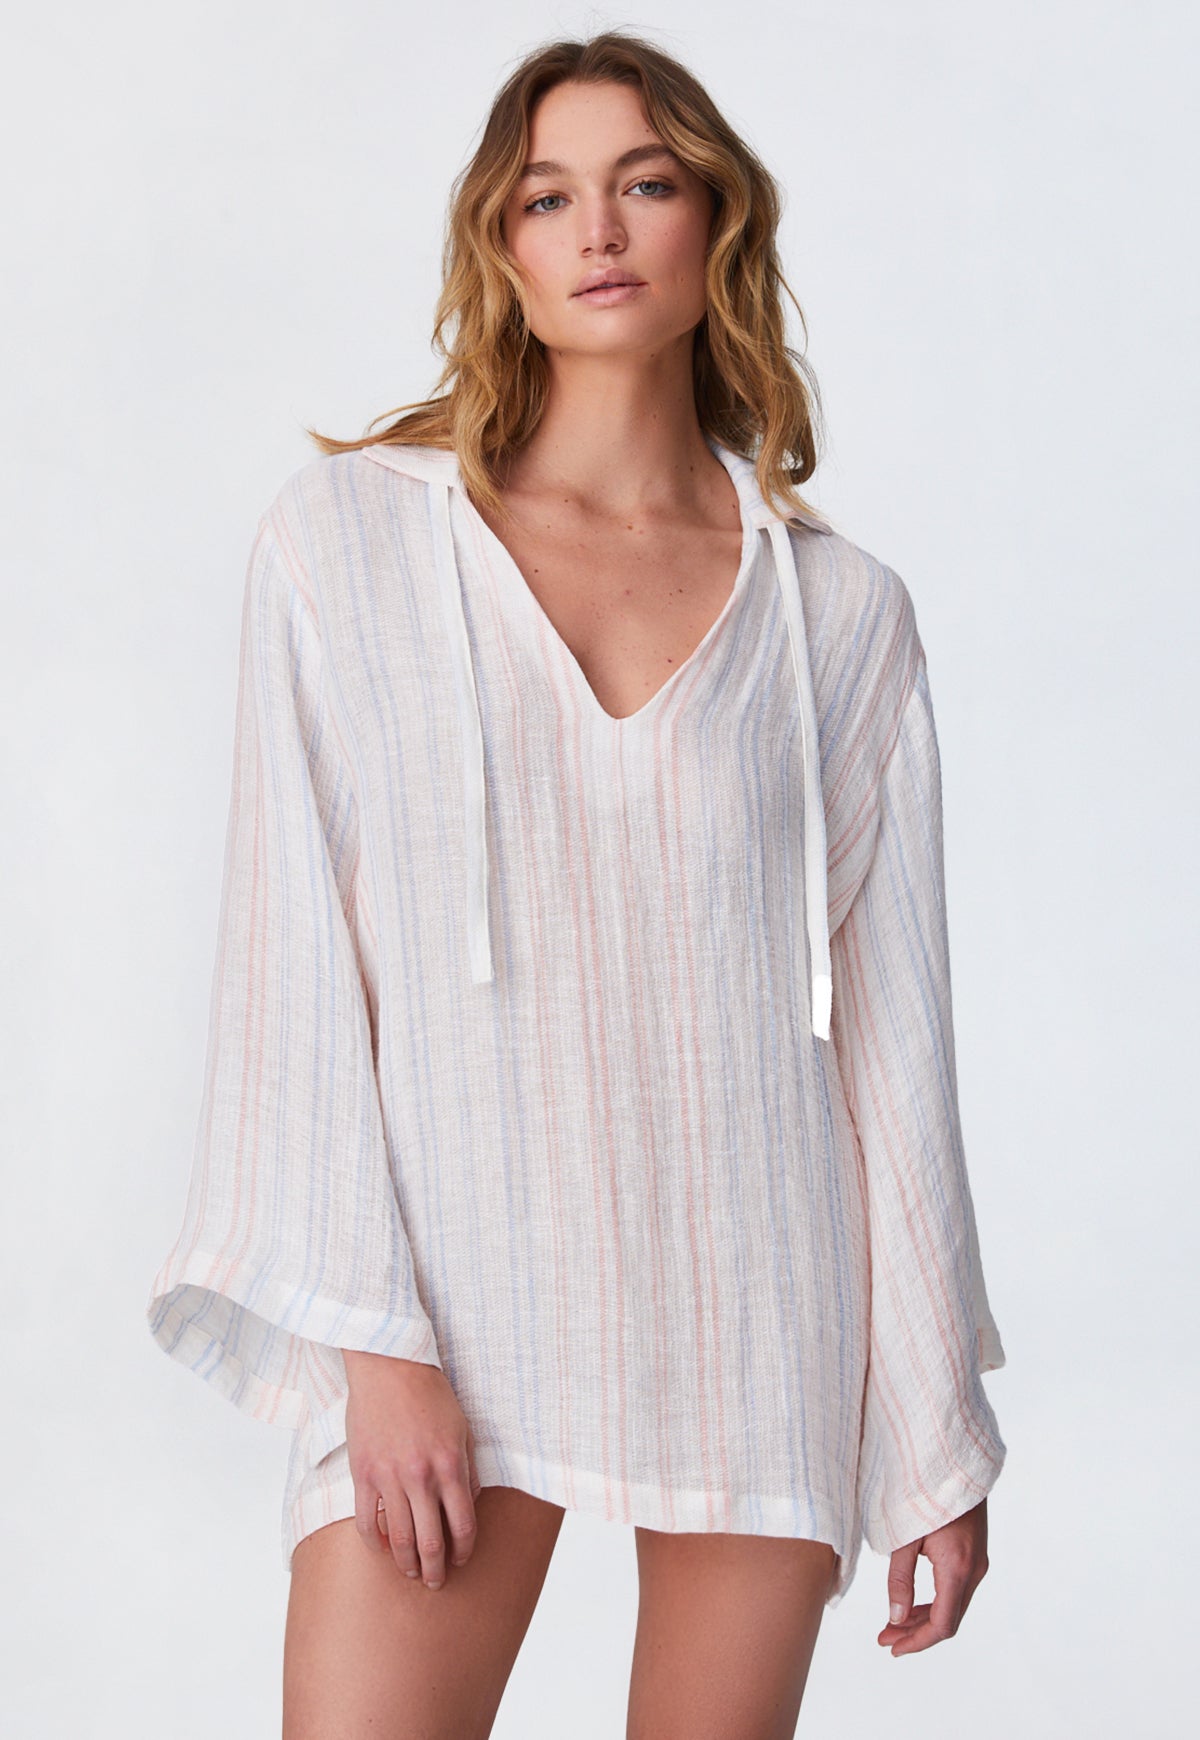 THE TUNIC in WHITE & PINK & BLUE STRIPED GAUZE